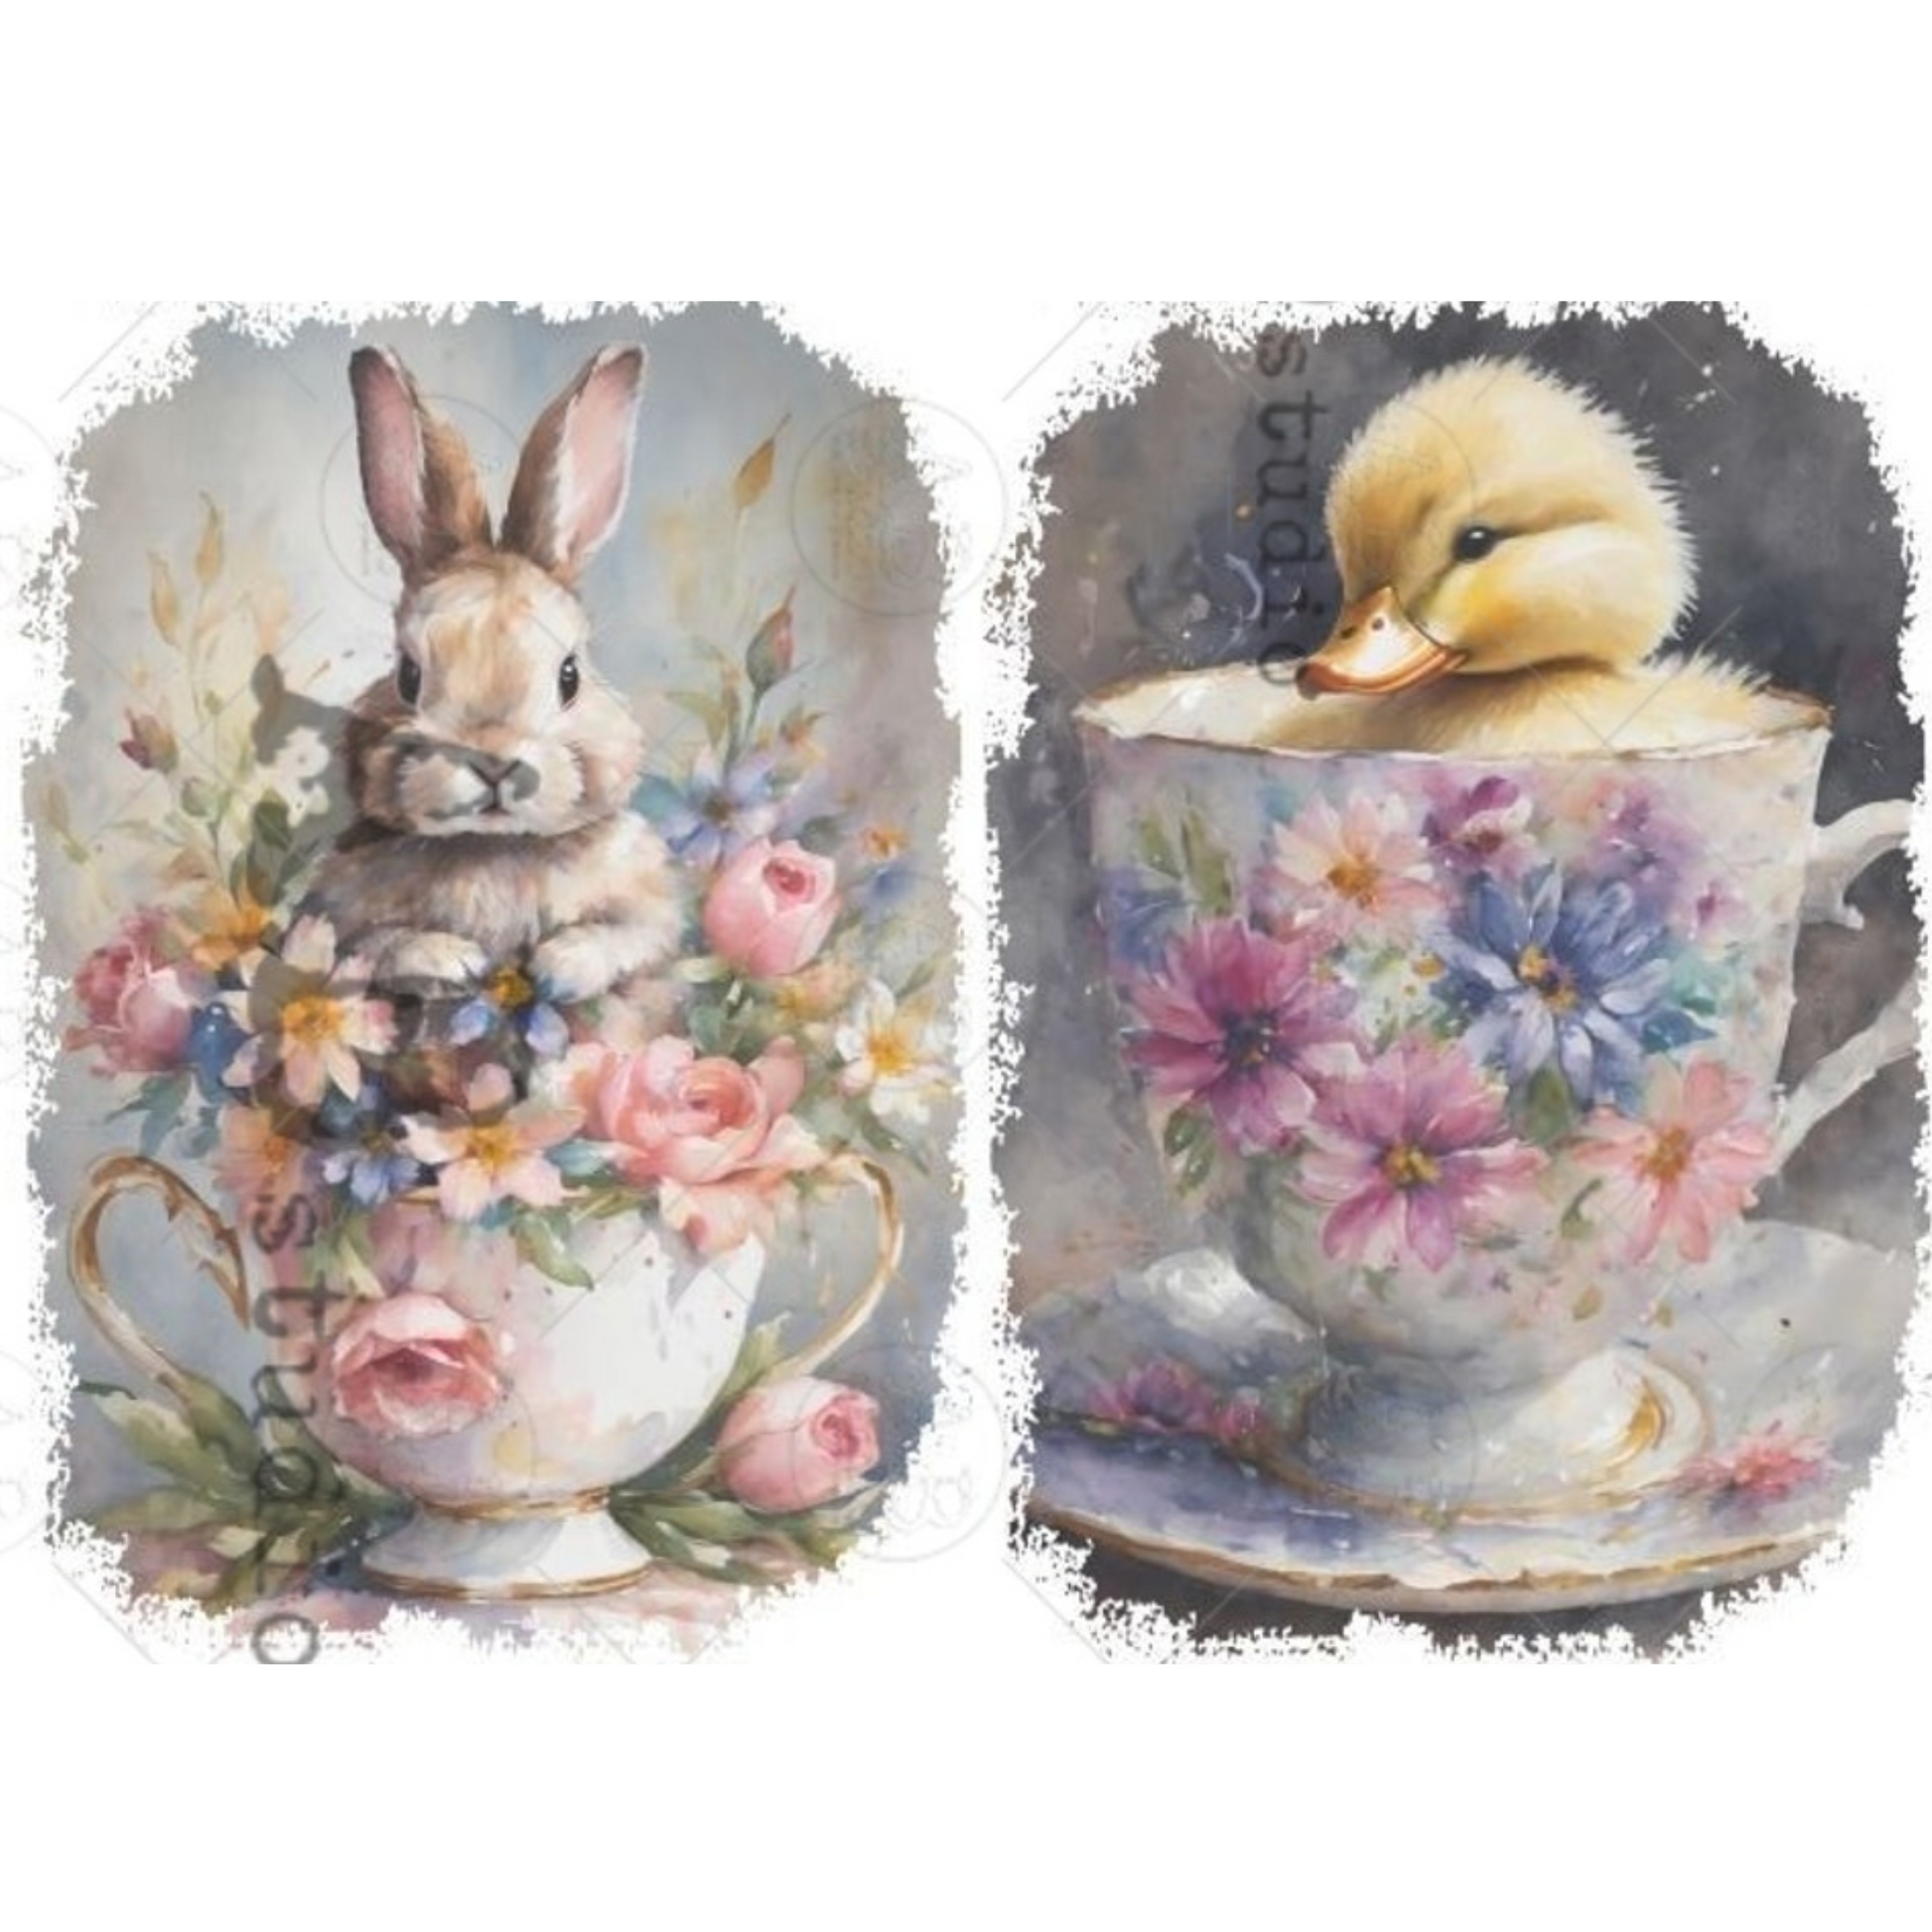 "Bunny & Chick Teacups Pair" decoupage rice paper by AB Studio. Available at Milton's Daughter.